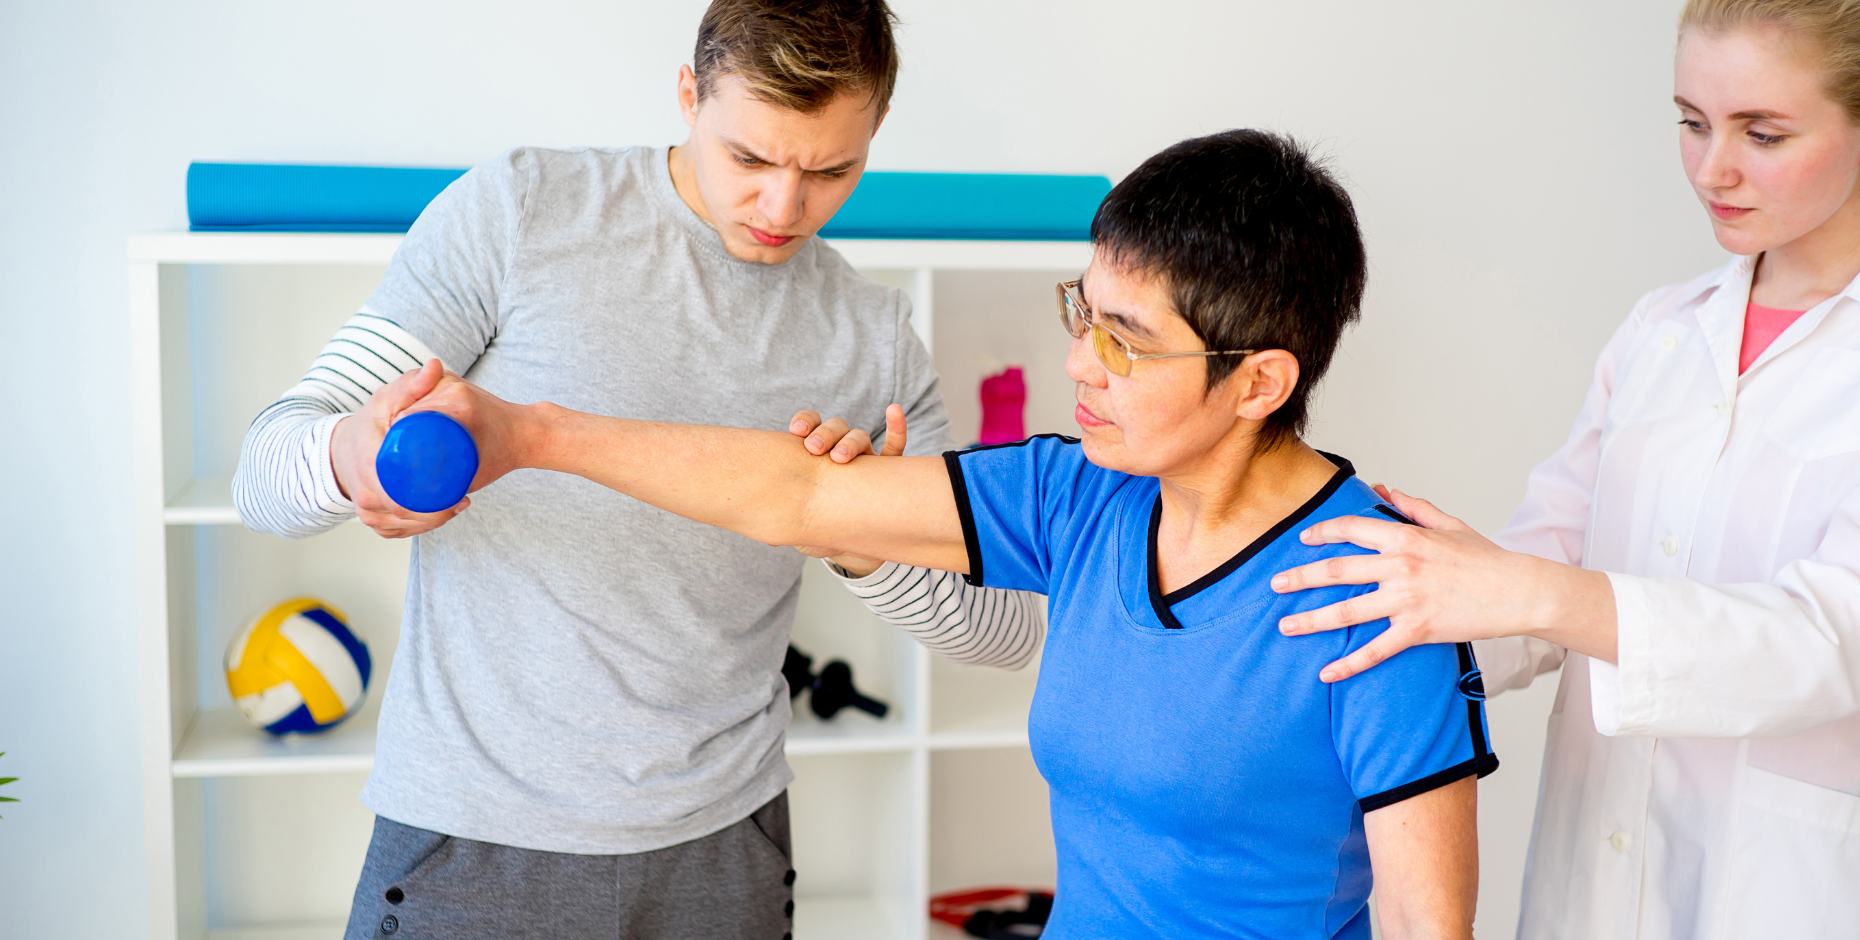 An older patient is lifting a small weight in the right hand with two clinicians correcting and monitoring their technique